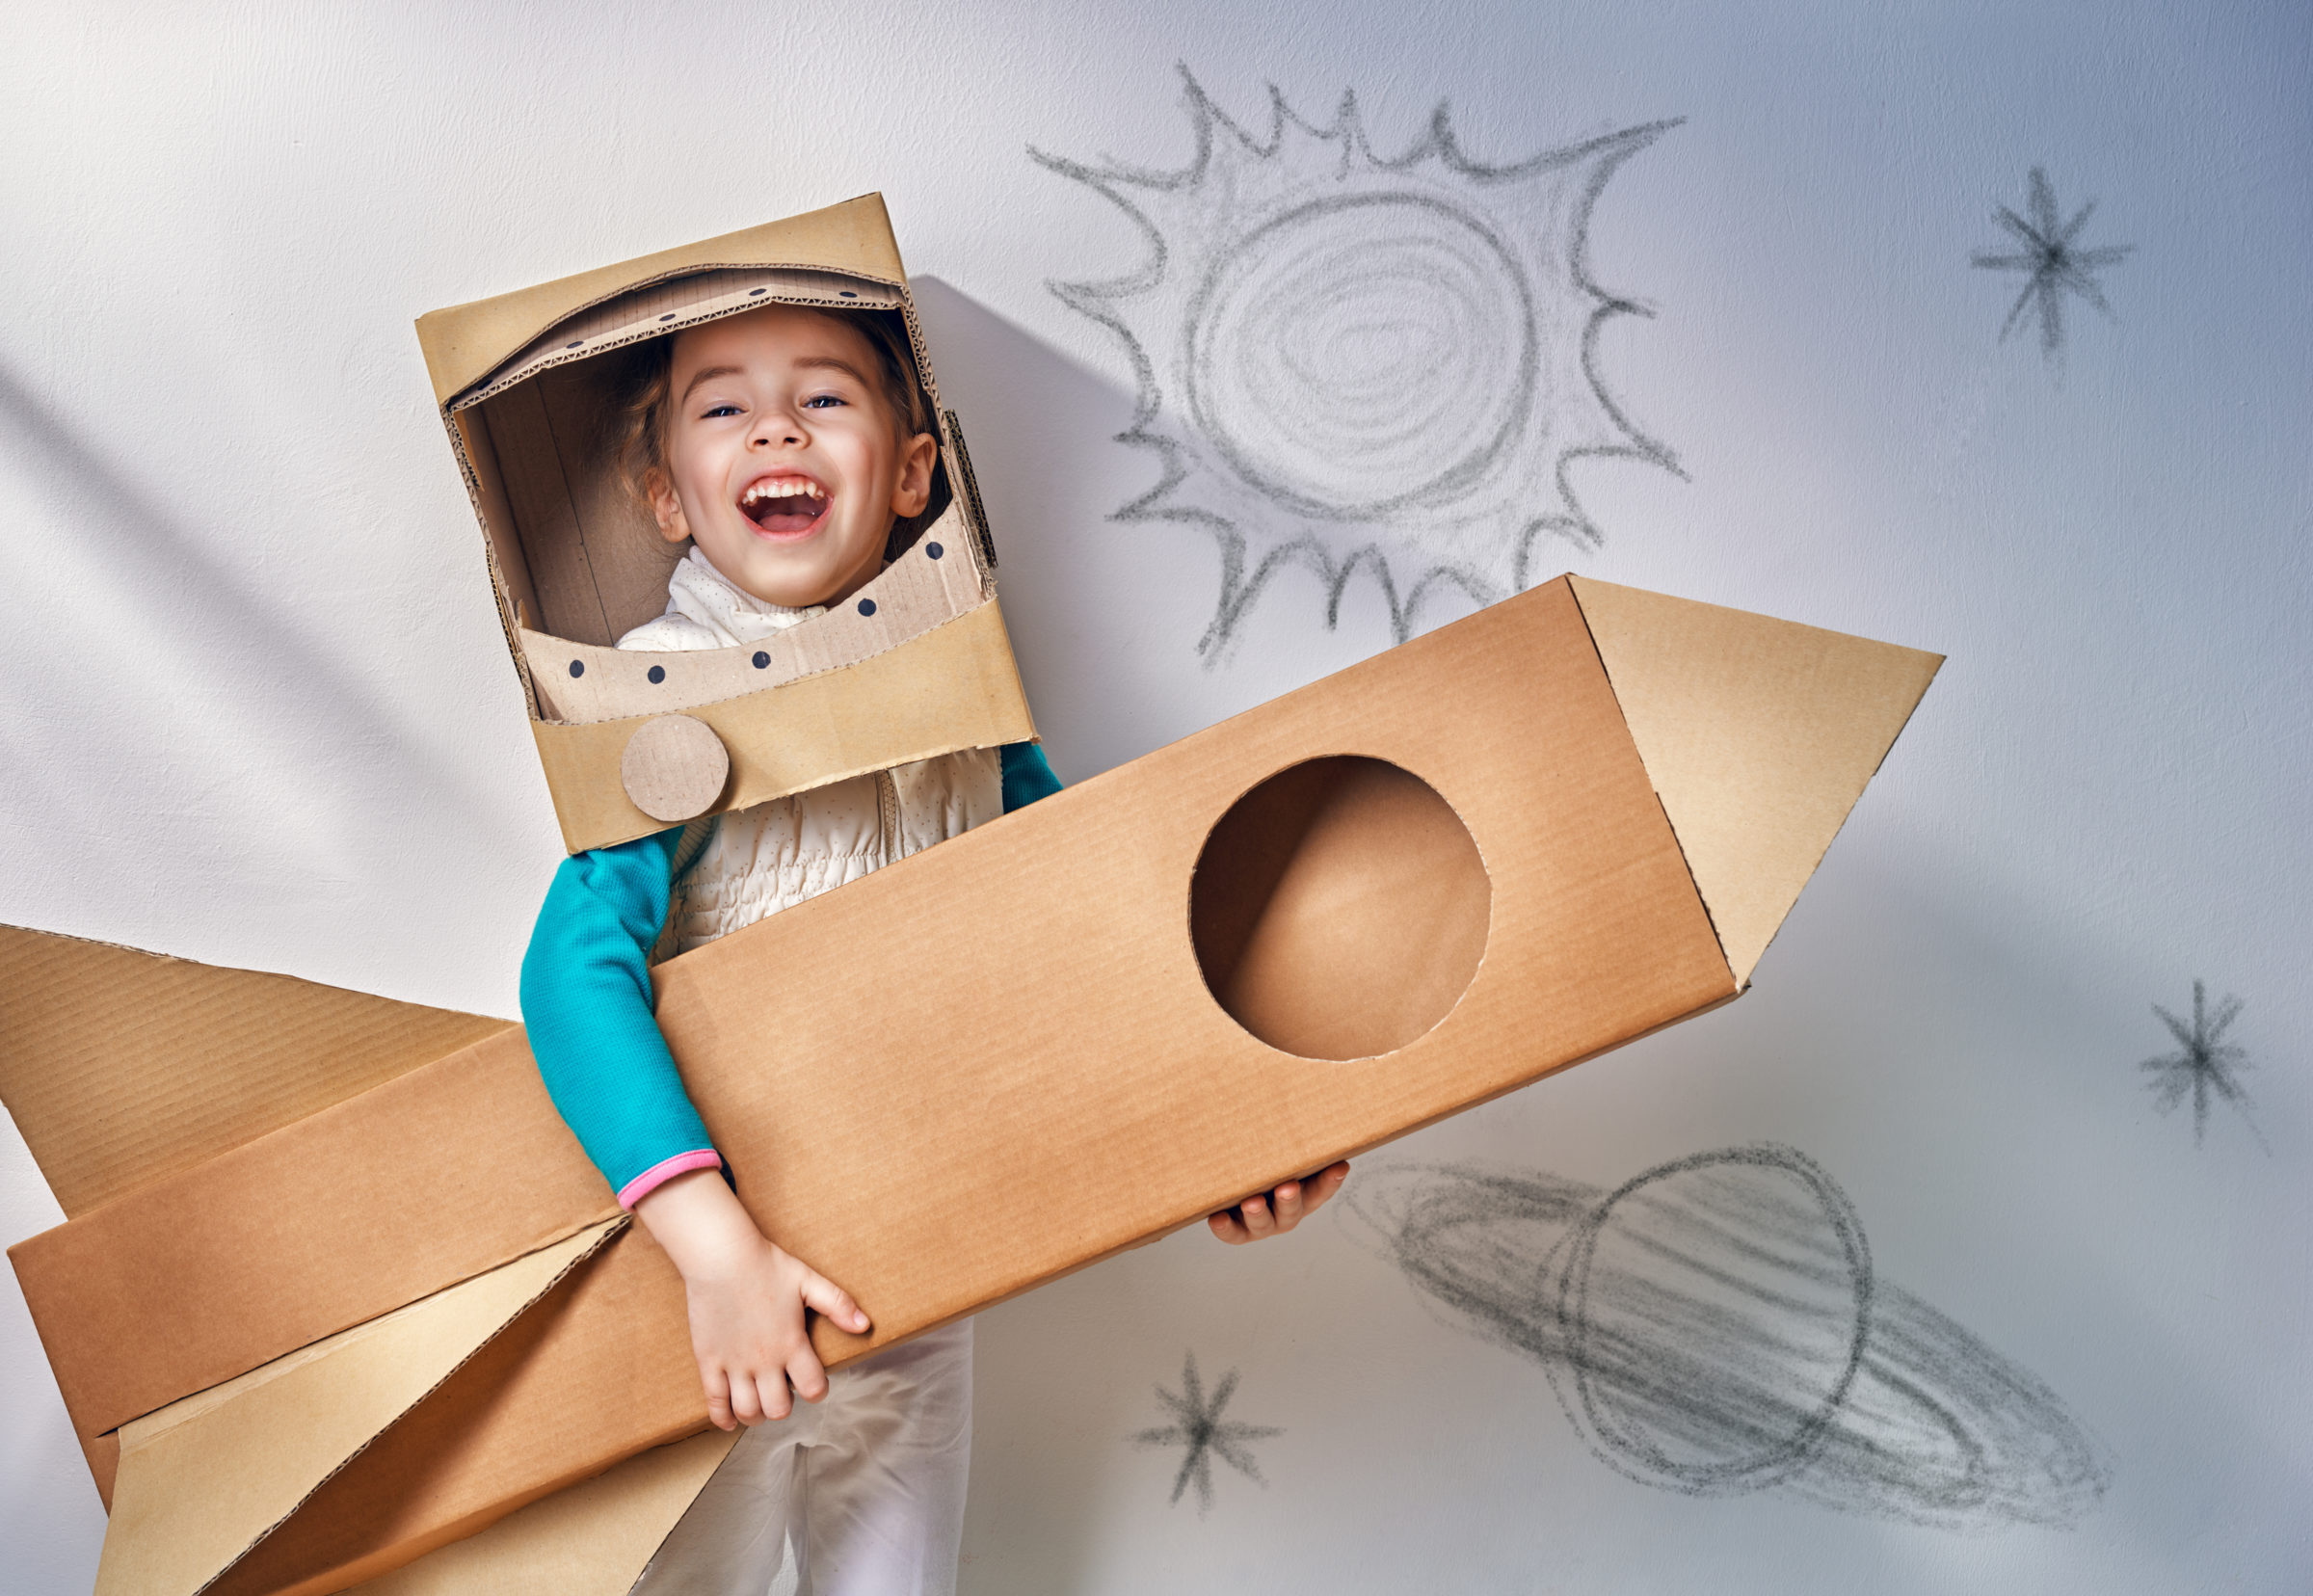 Child dressed in cardboard astronaut costume and rocket